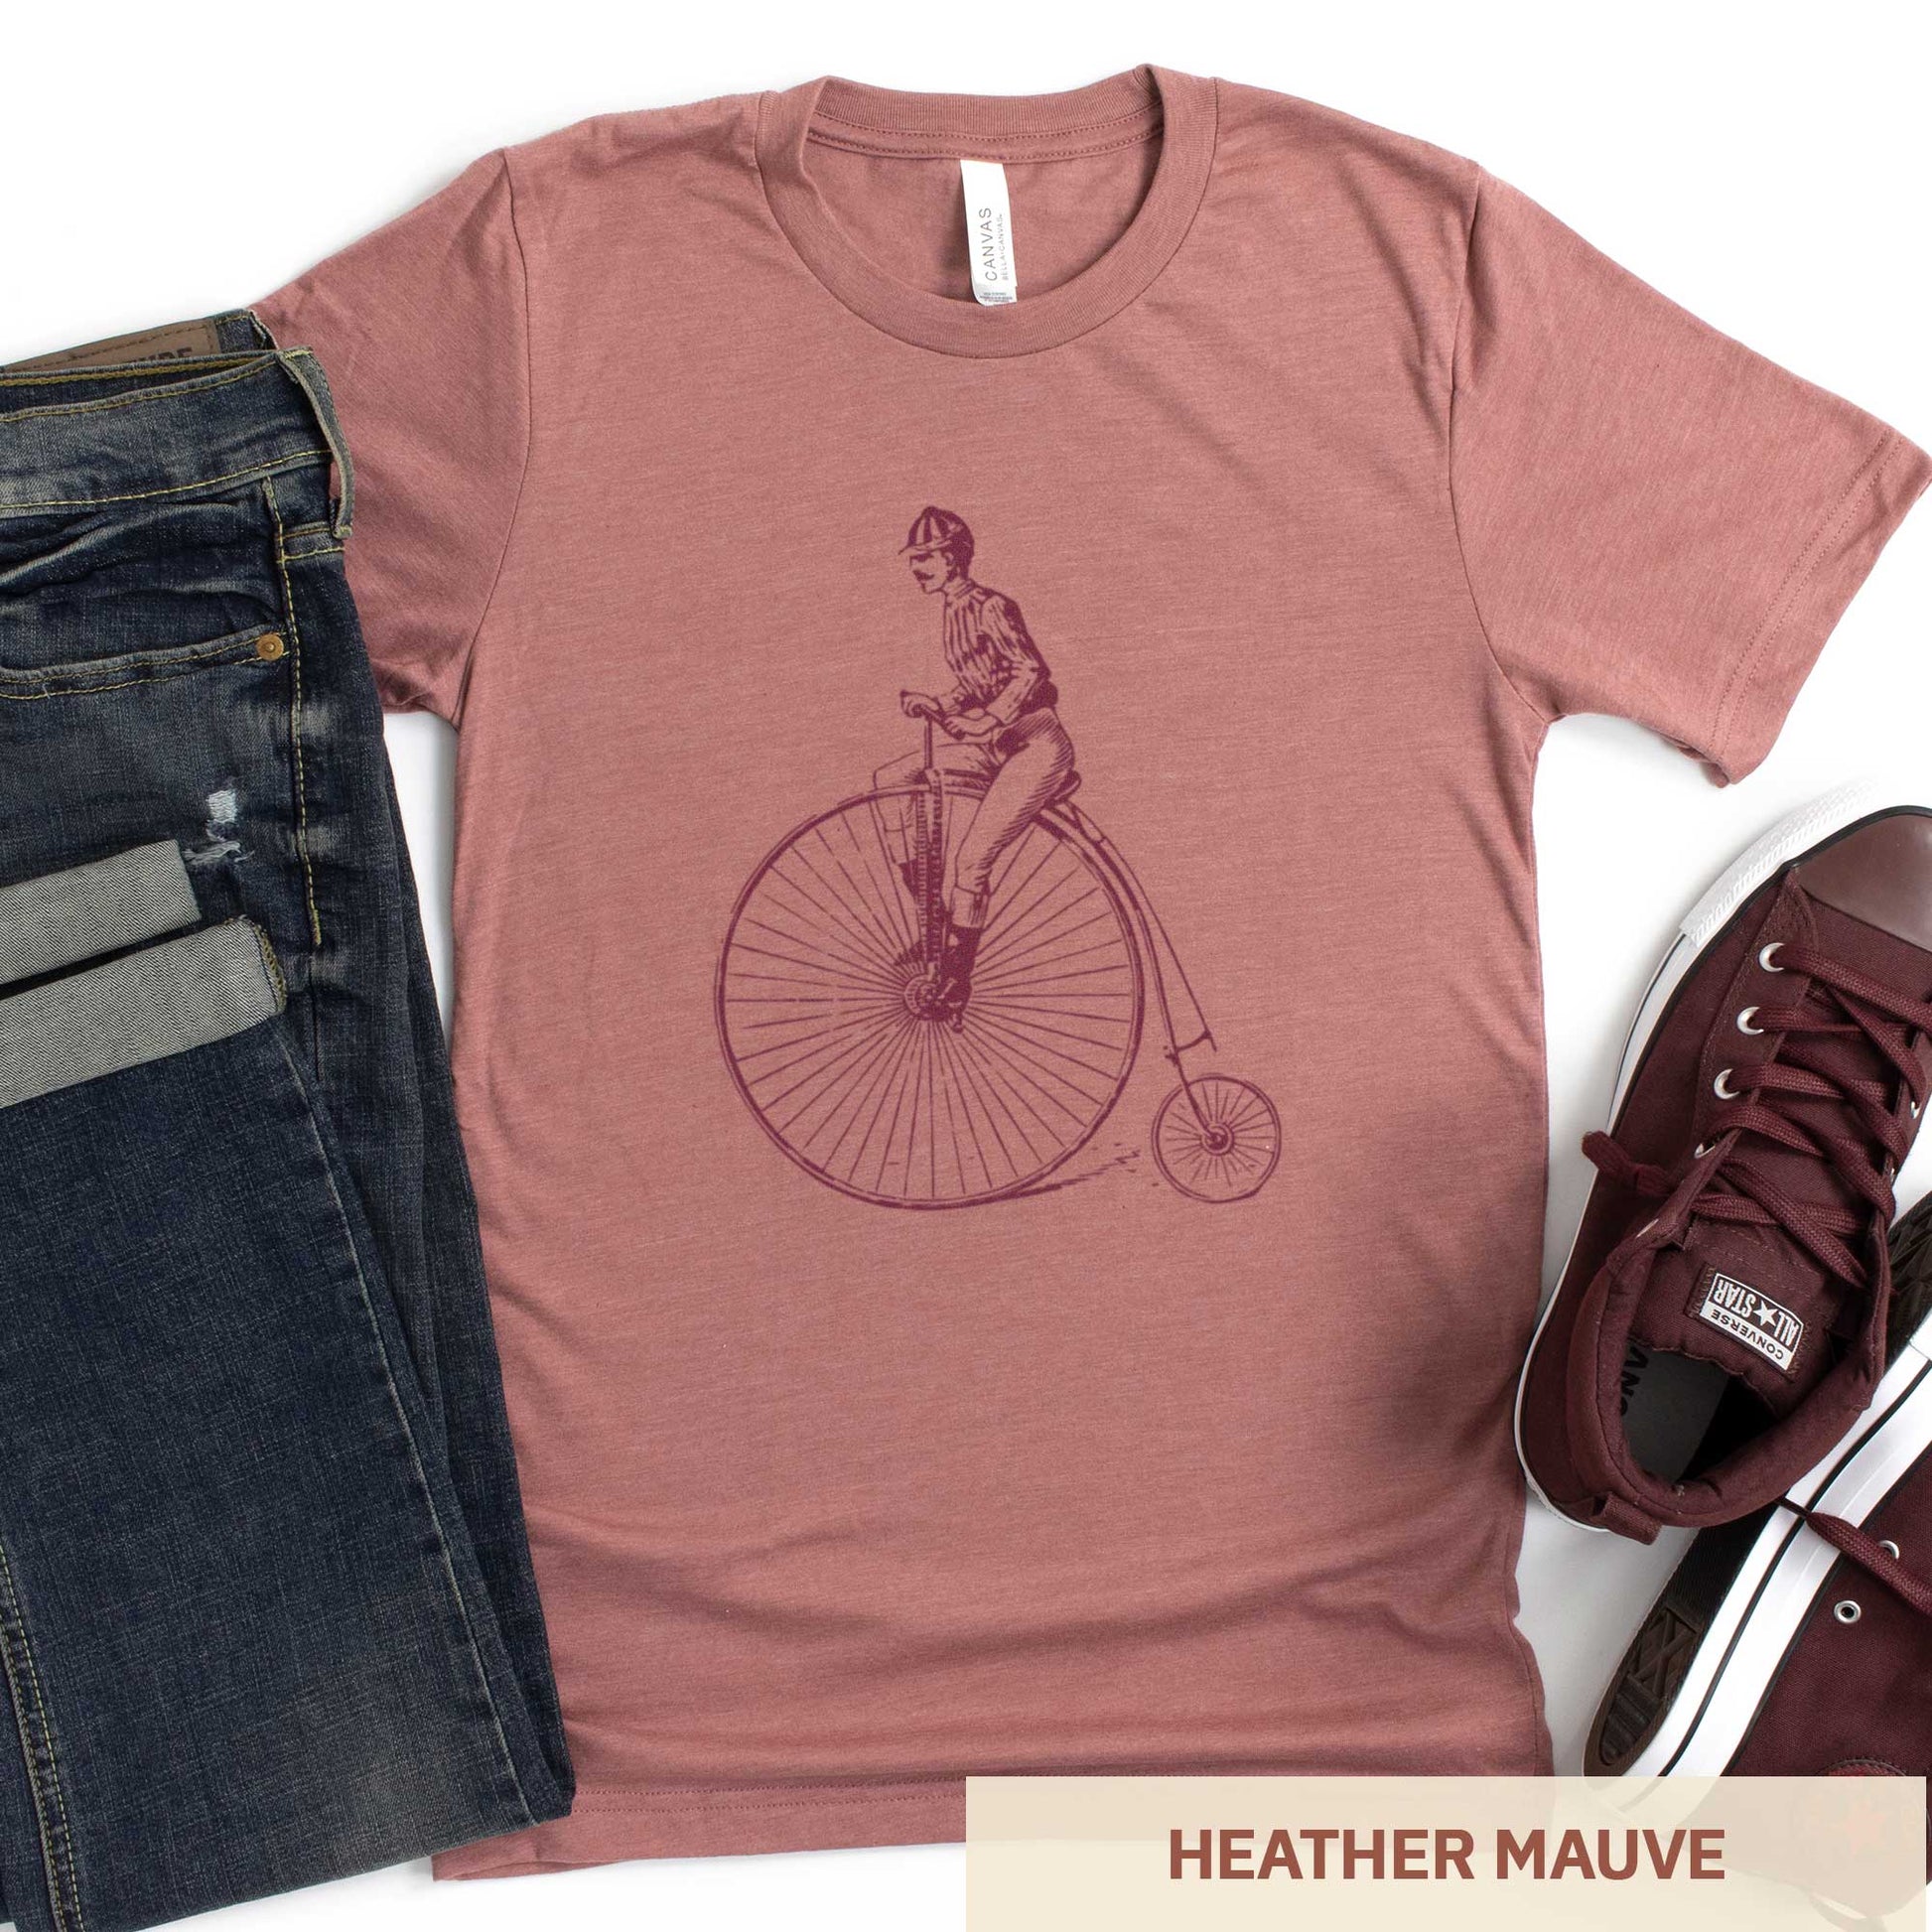 An heather mauve Bella Canvas t-shirt featuring a Victorian man riding a penny farthing bicycle.